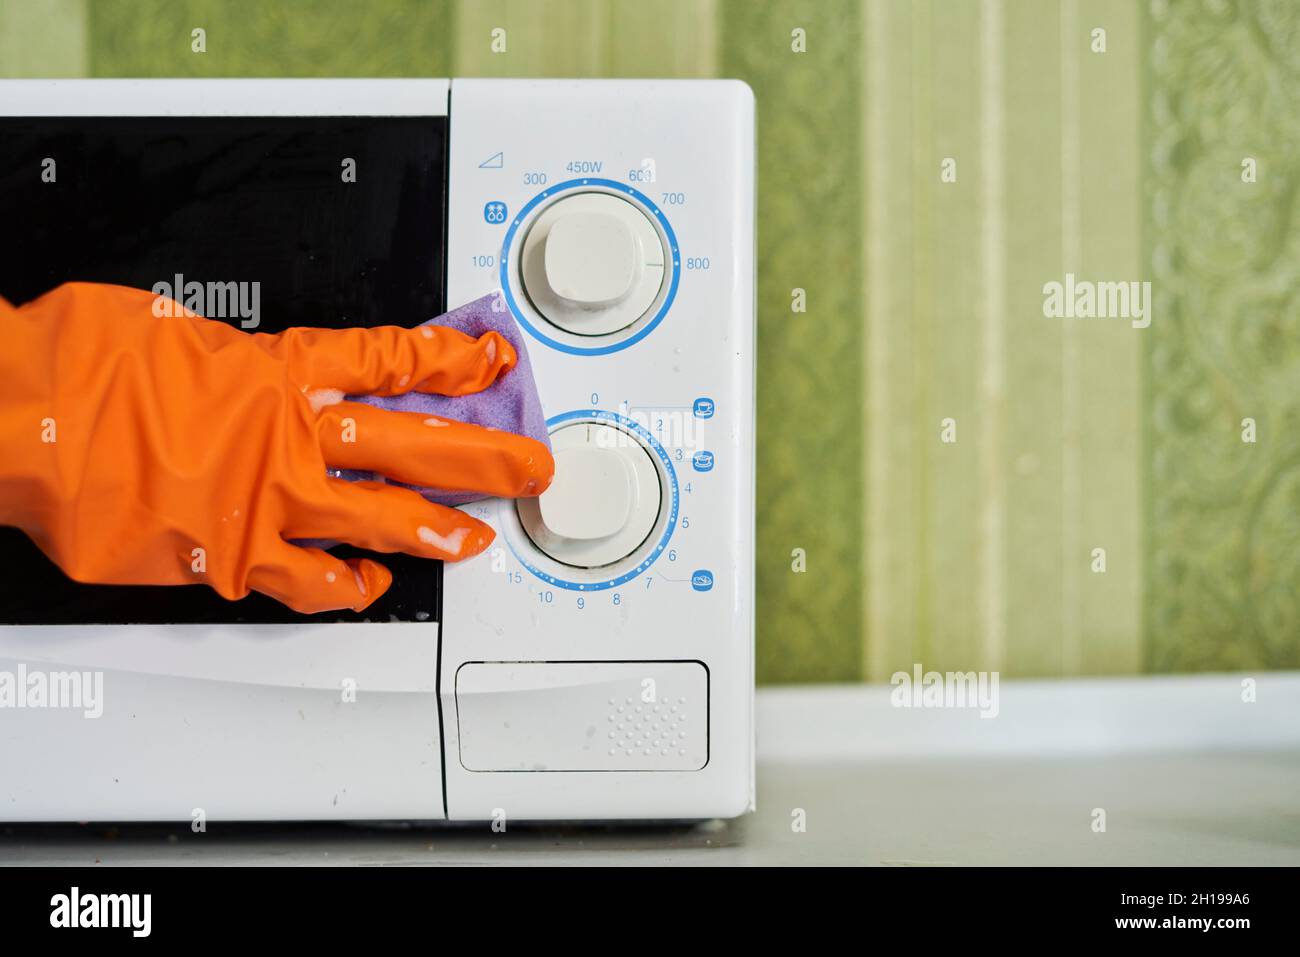 Woman in rubber gloves cleaning microwave oven with sponge in kitchen. Cleaning microwave in the kitchen Stock Photo